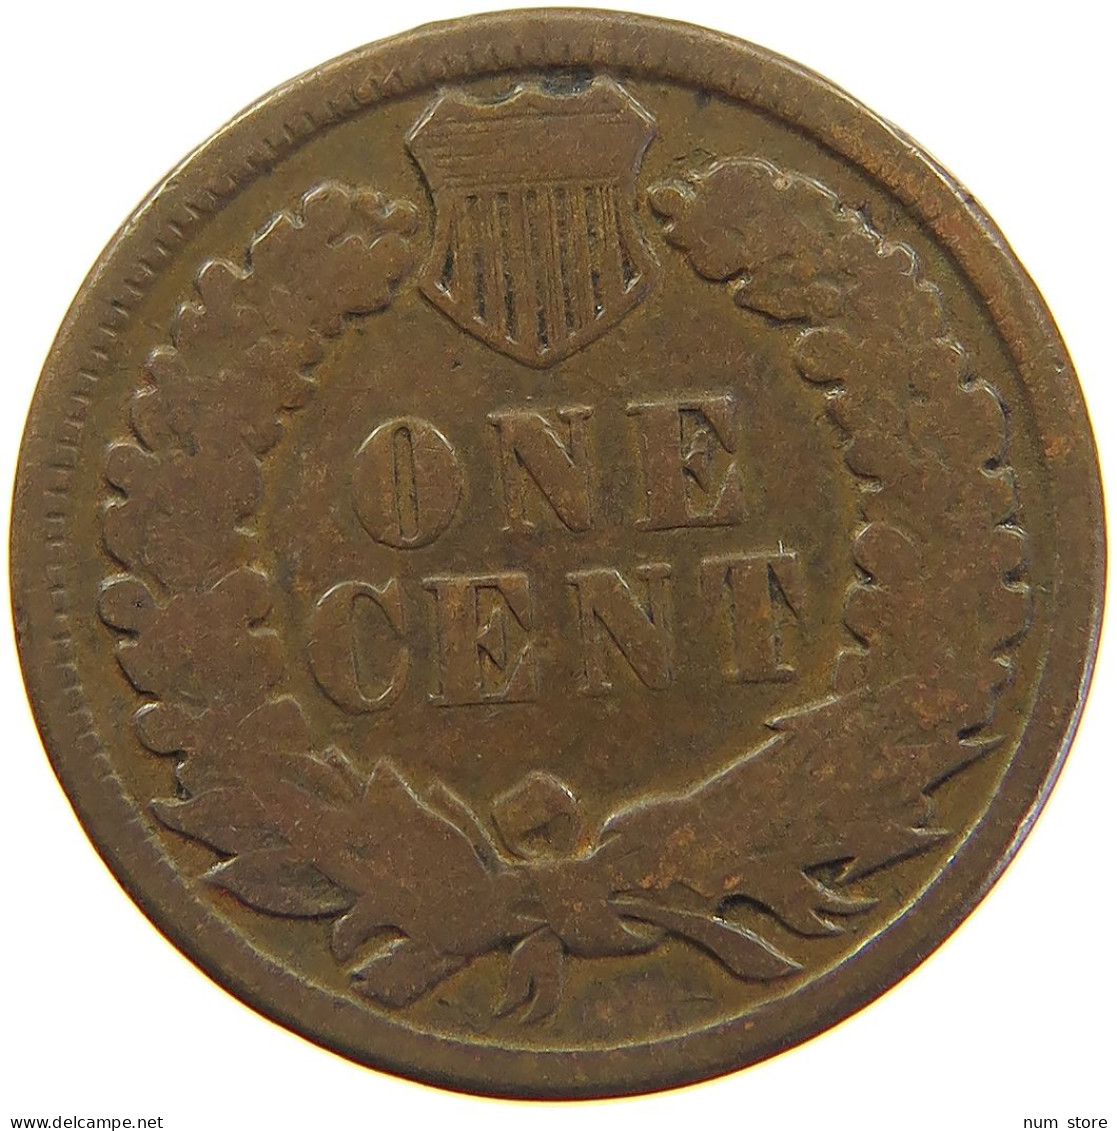 UNITED STATES OF AMERICA CENT 1884 INDIAN HEAD #c083 0661 - 1859-1909: Indian Head